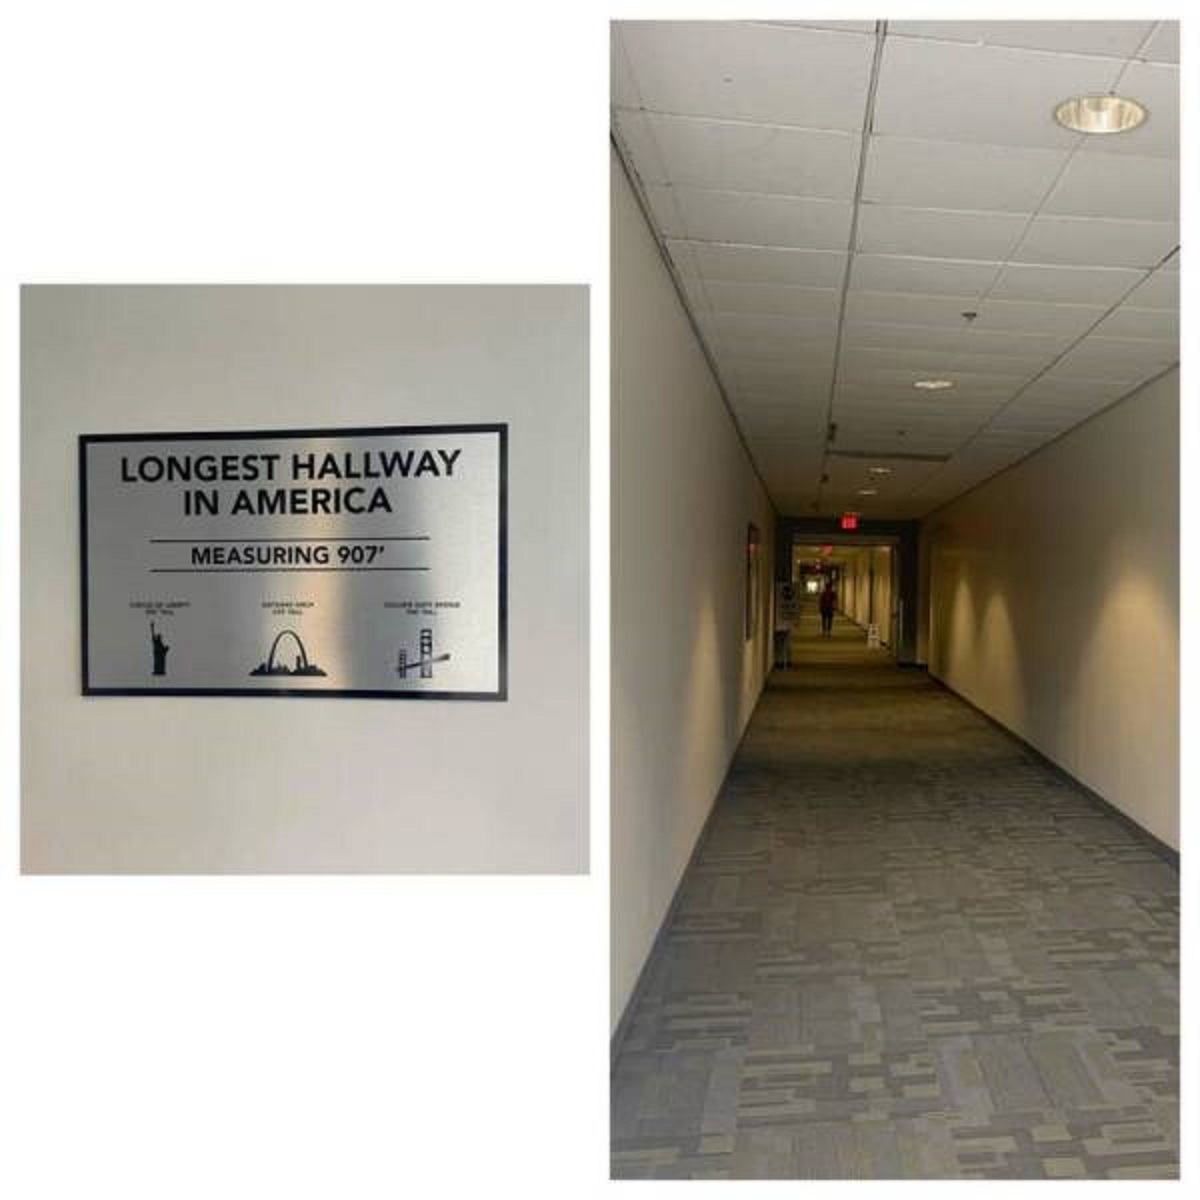 Not only is there a place that claims the longest hallway in America, but there's also a plaque commemorating it: